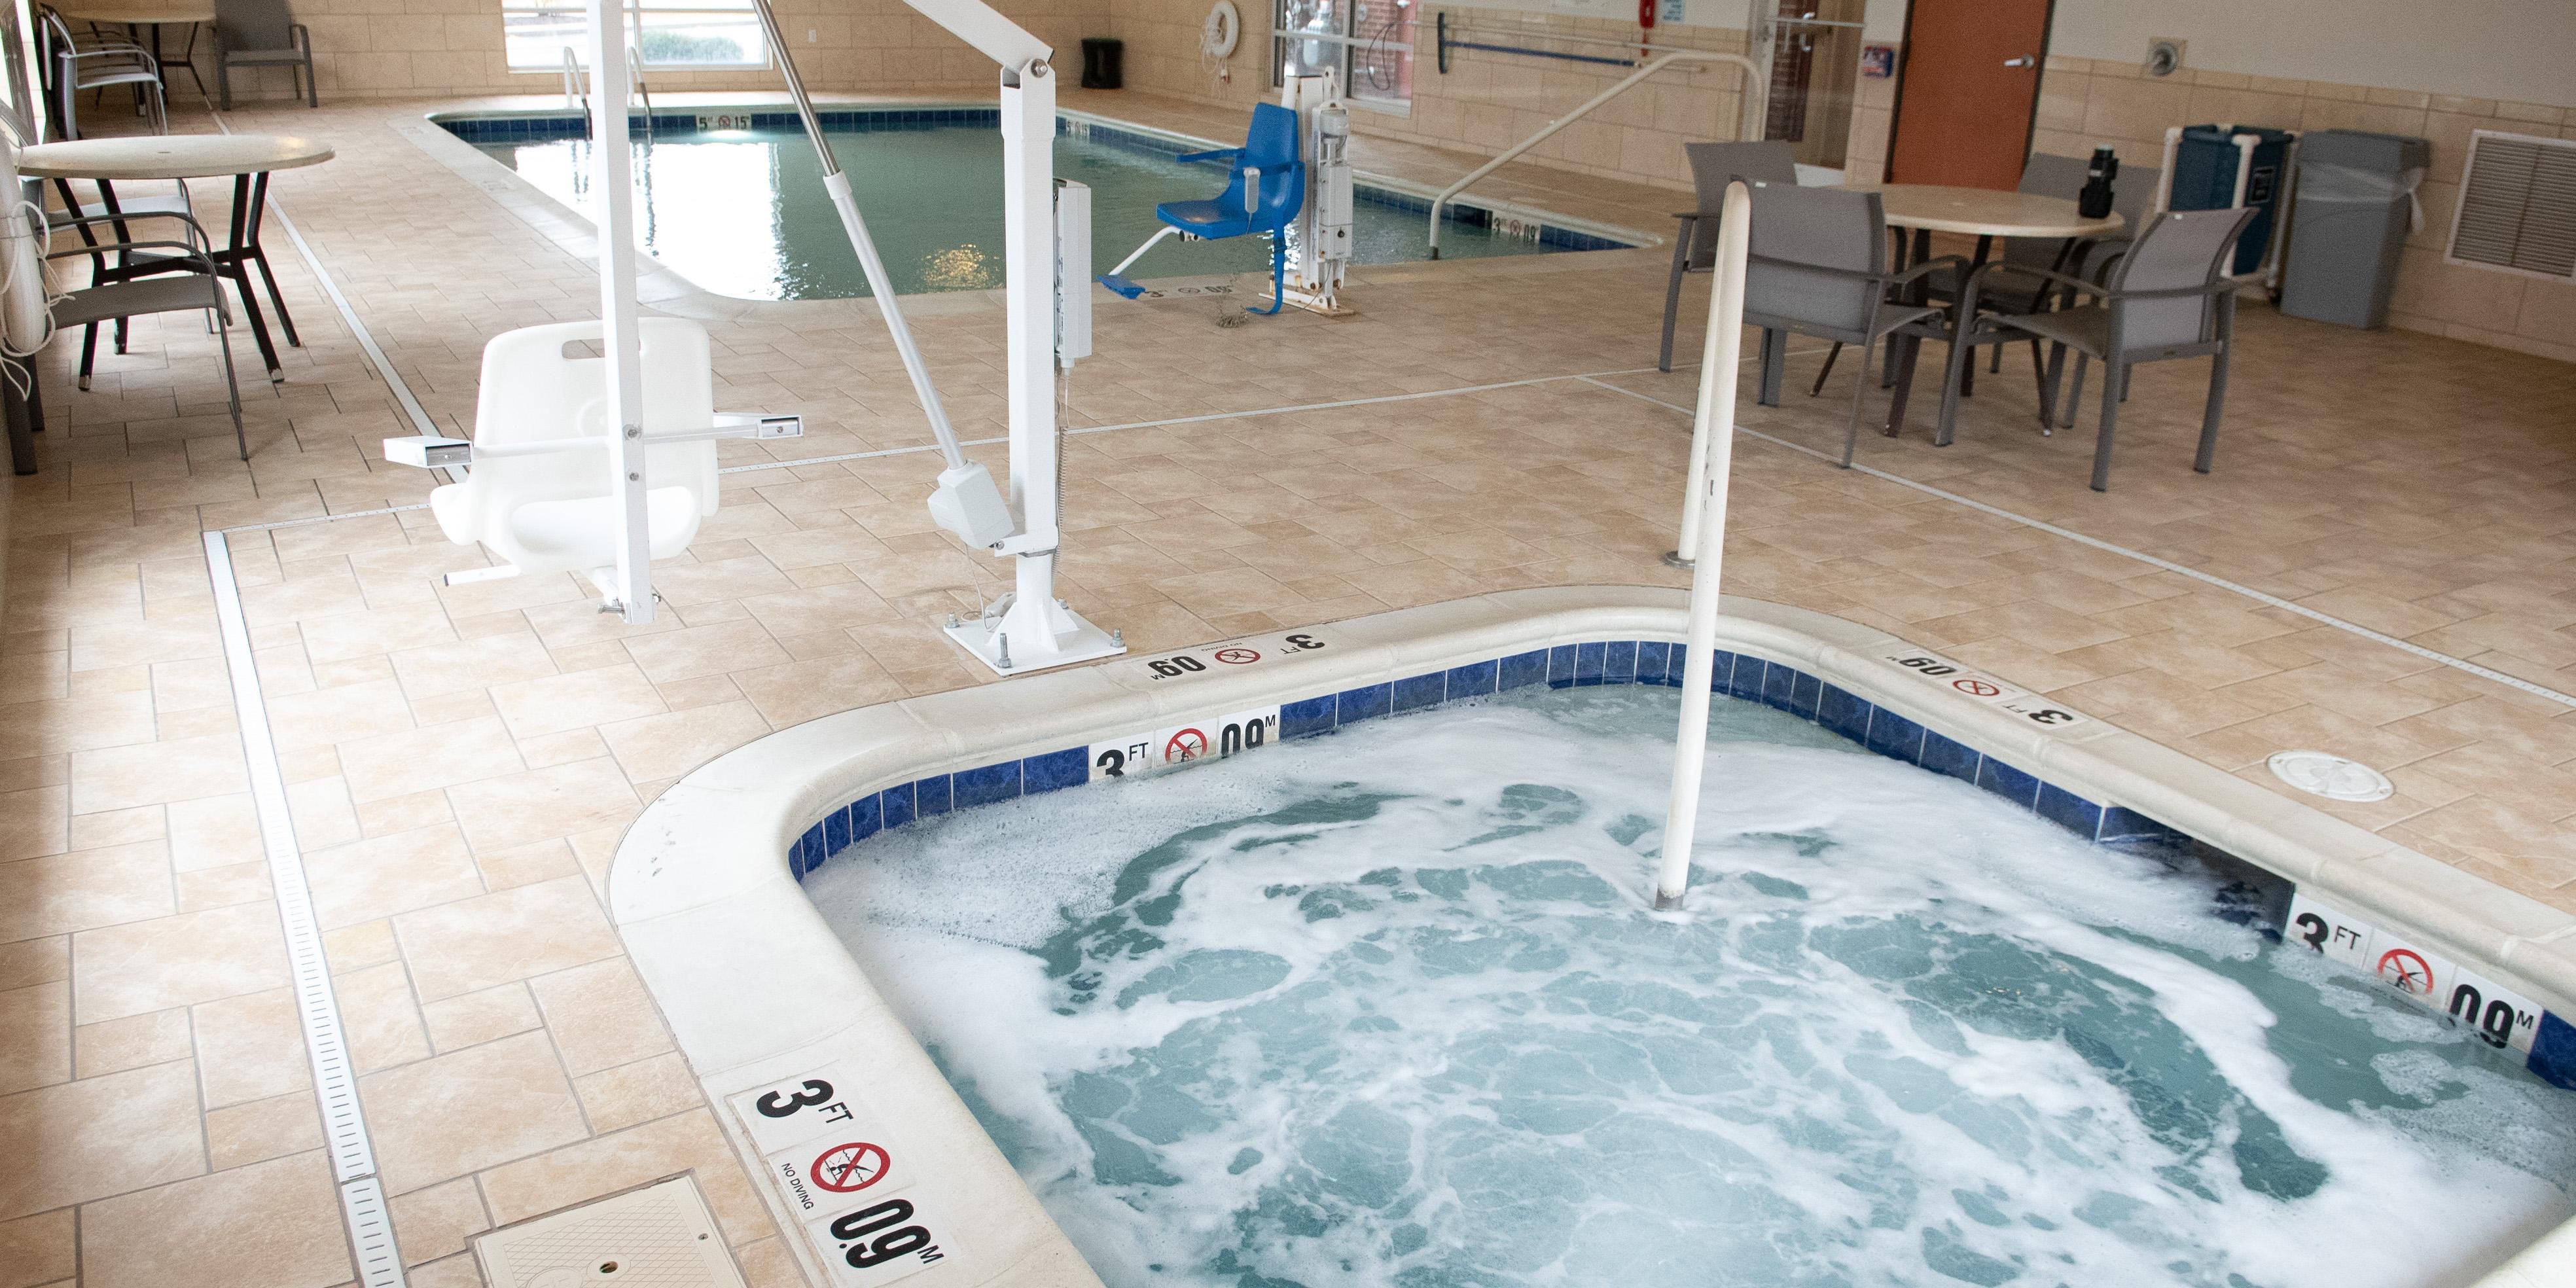 Relax in our indoor 24 hour pool and hot tub after a hard day at work. If you are in town for leisure, you can enjoy the pool any time. Get in, the water is warm!